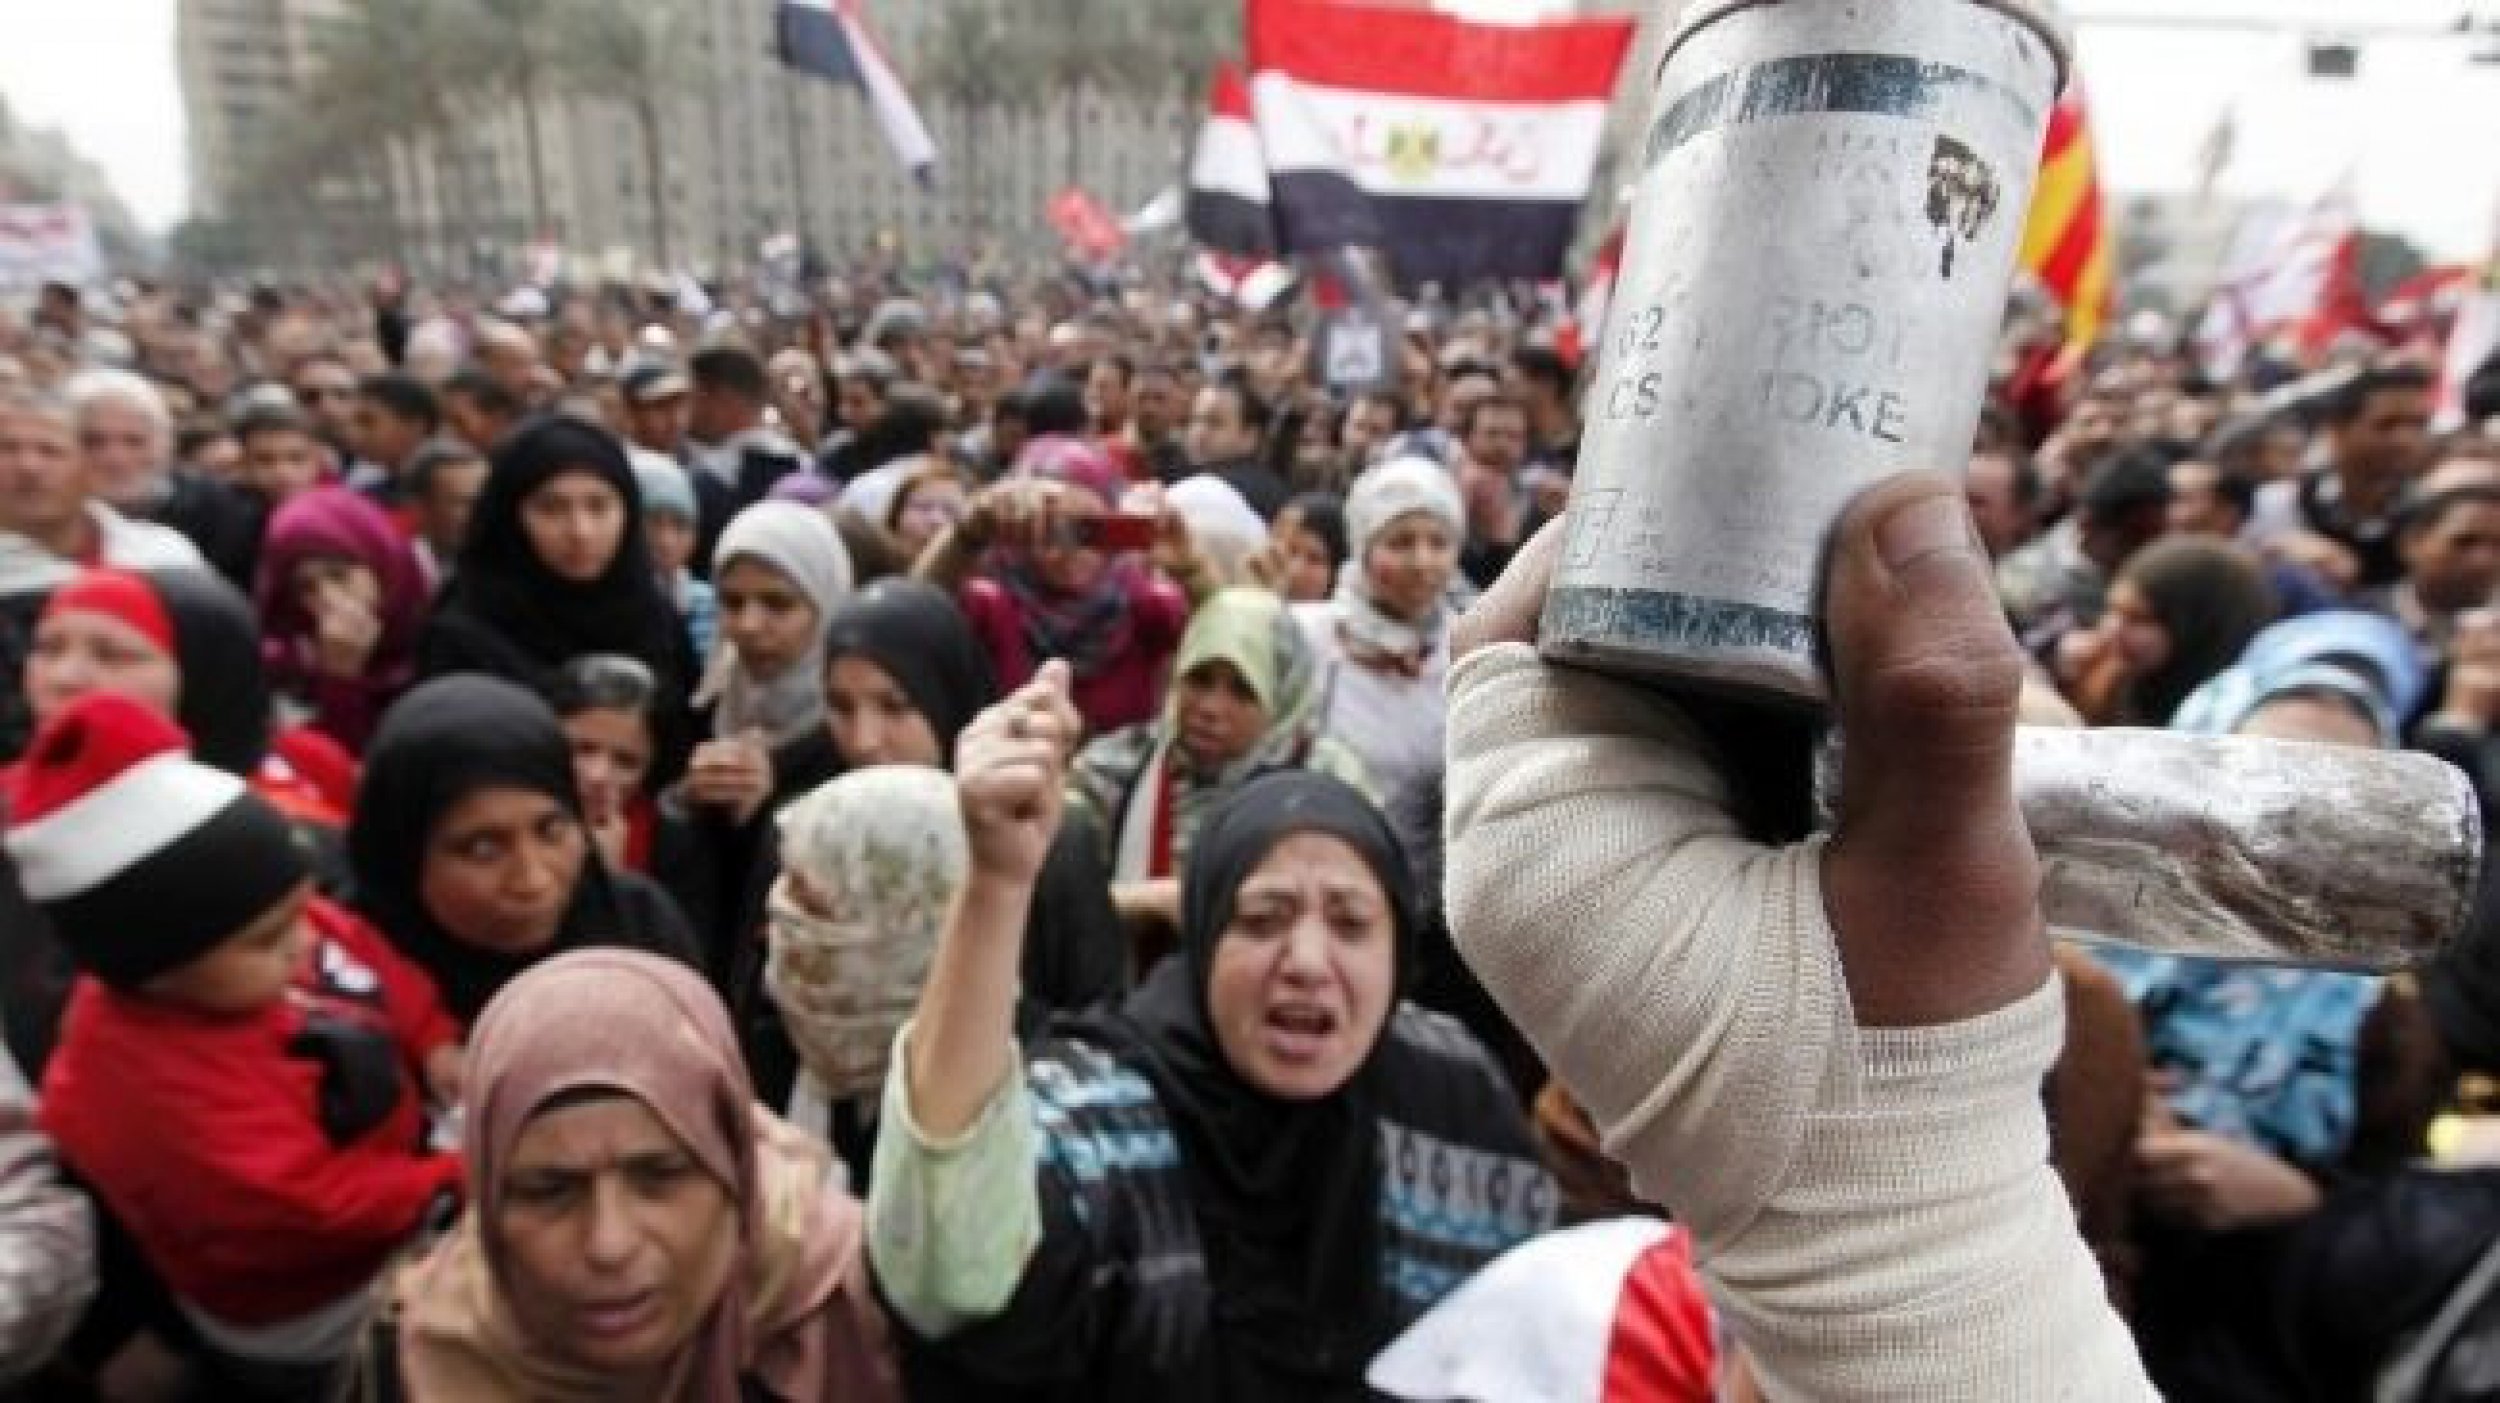 The Reign of Violence Intensifies in Egypt as People Continue to Lose Their Lives